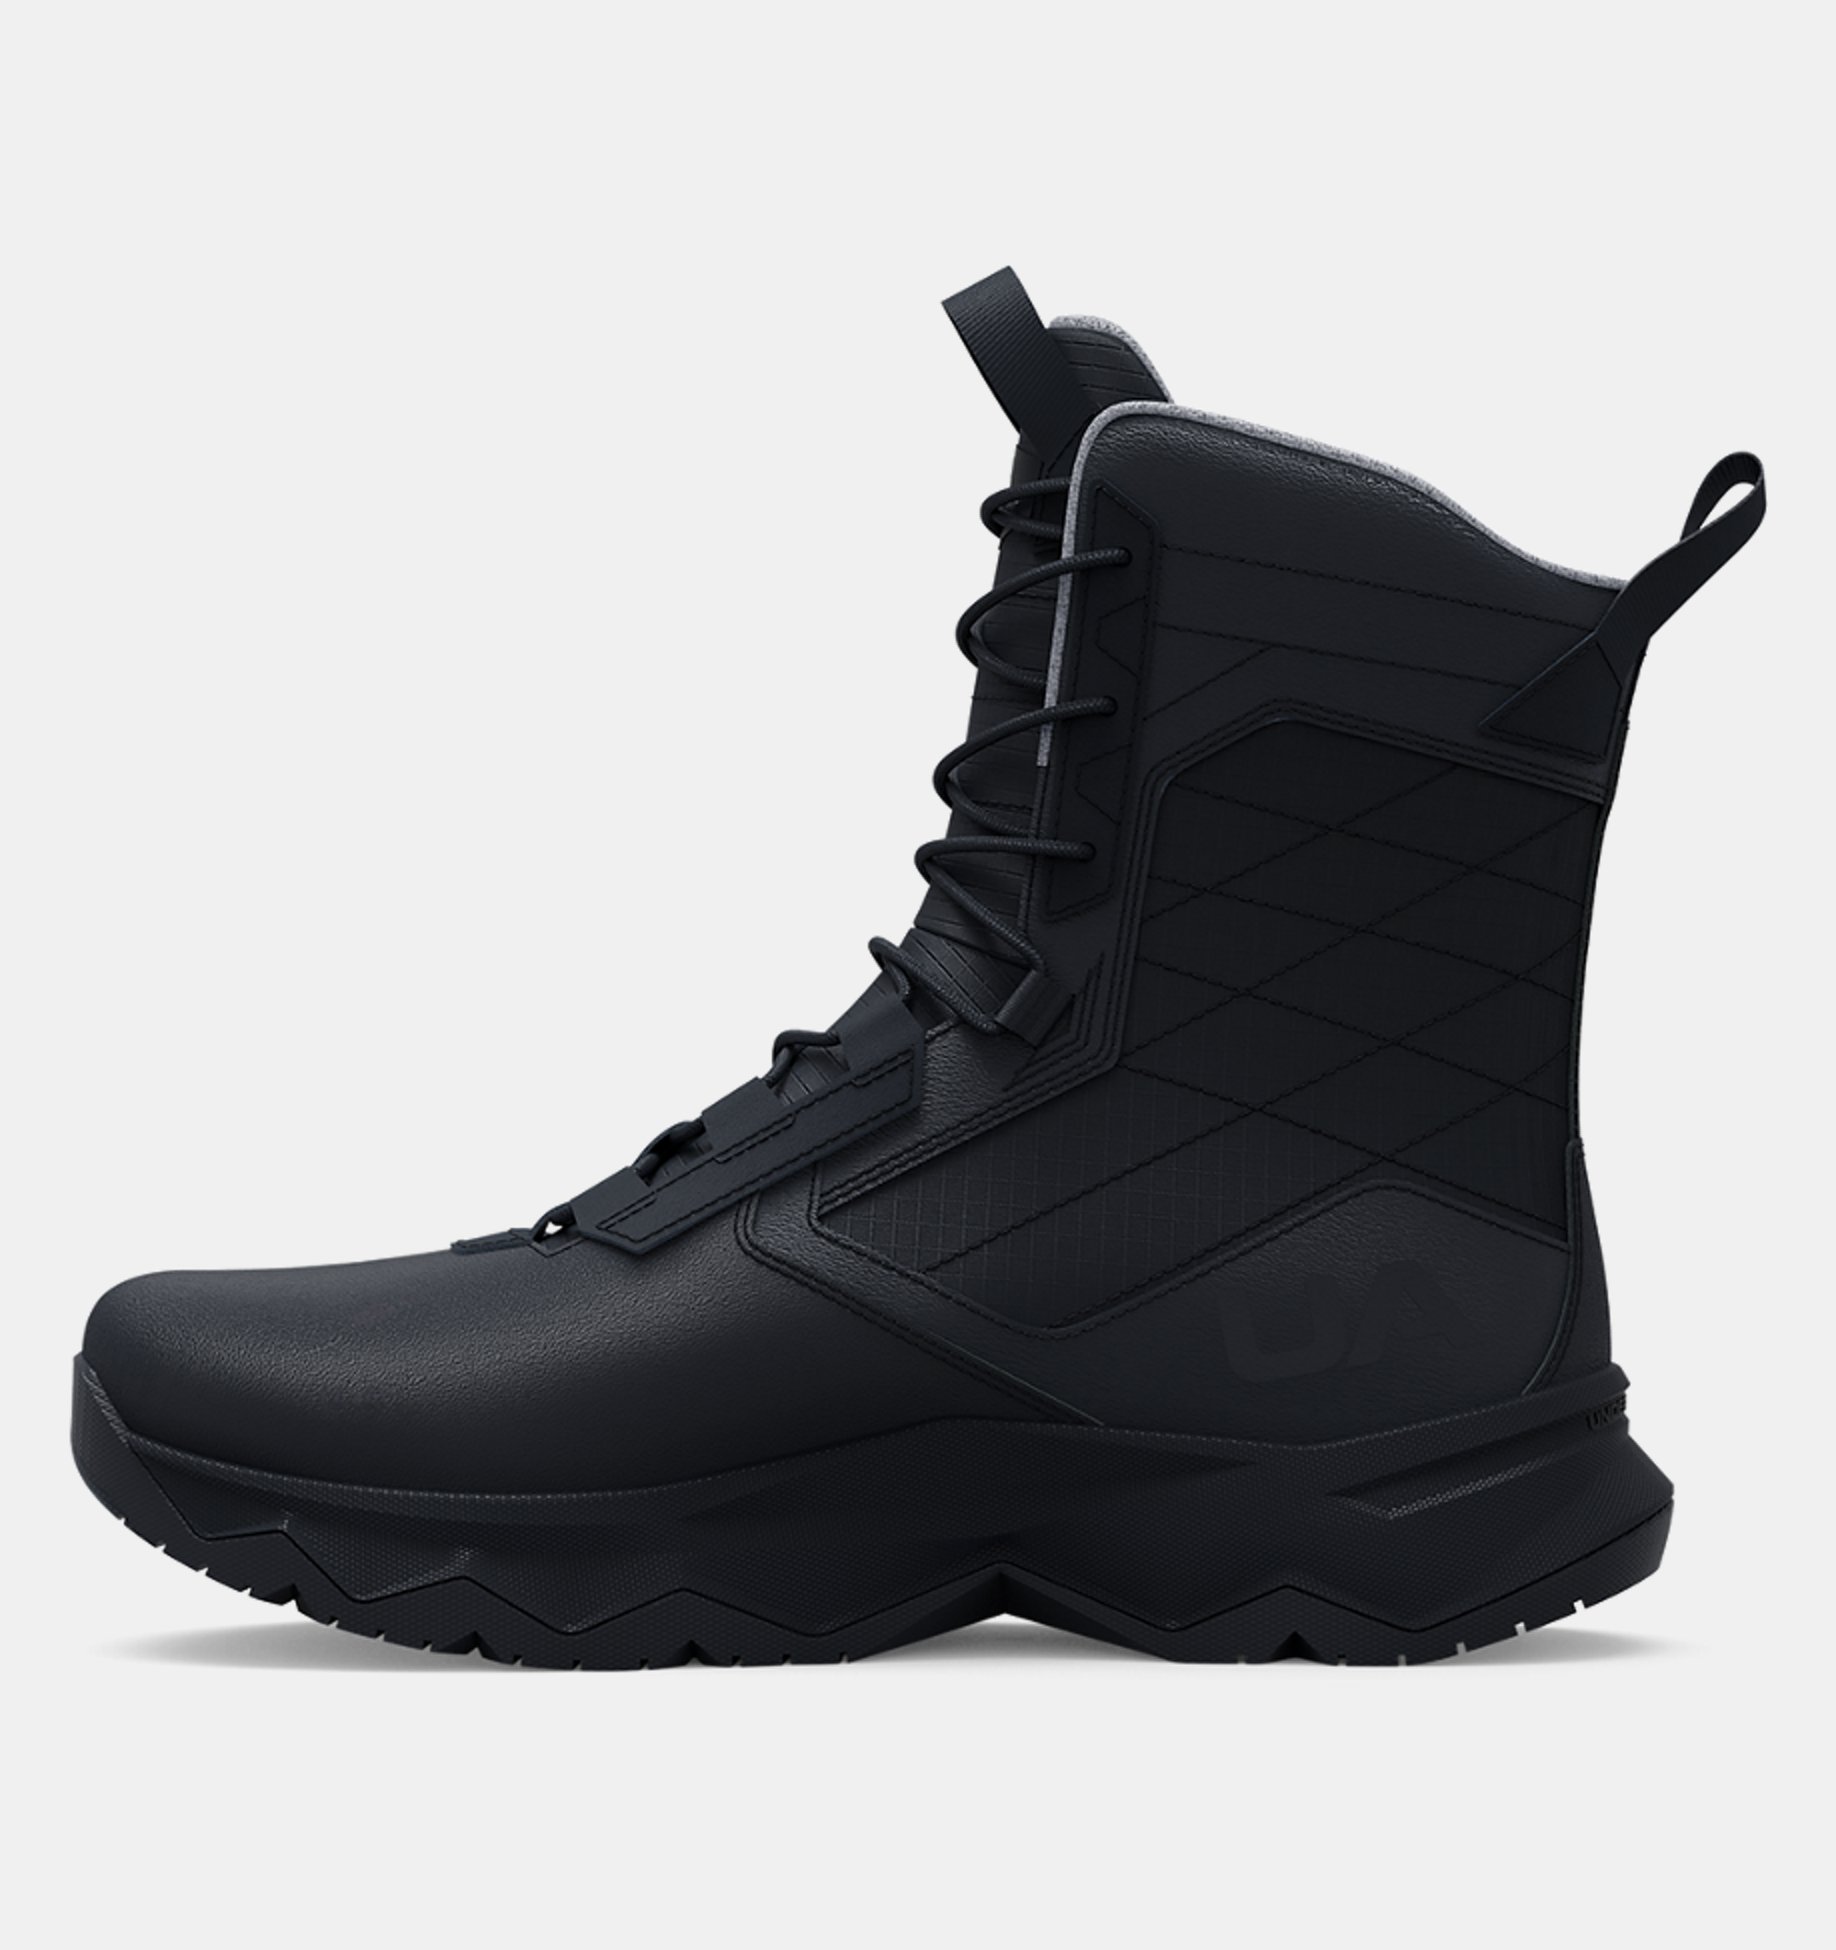 Under Armour Men's Stellar Tac Protect Military and Tactical Boot 